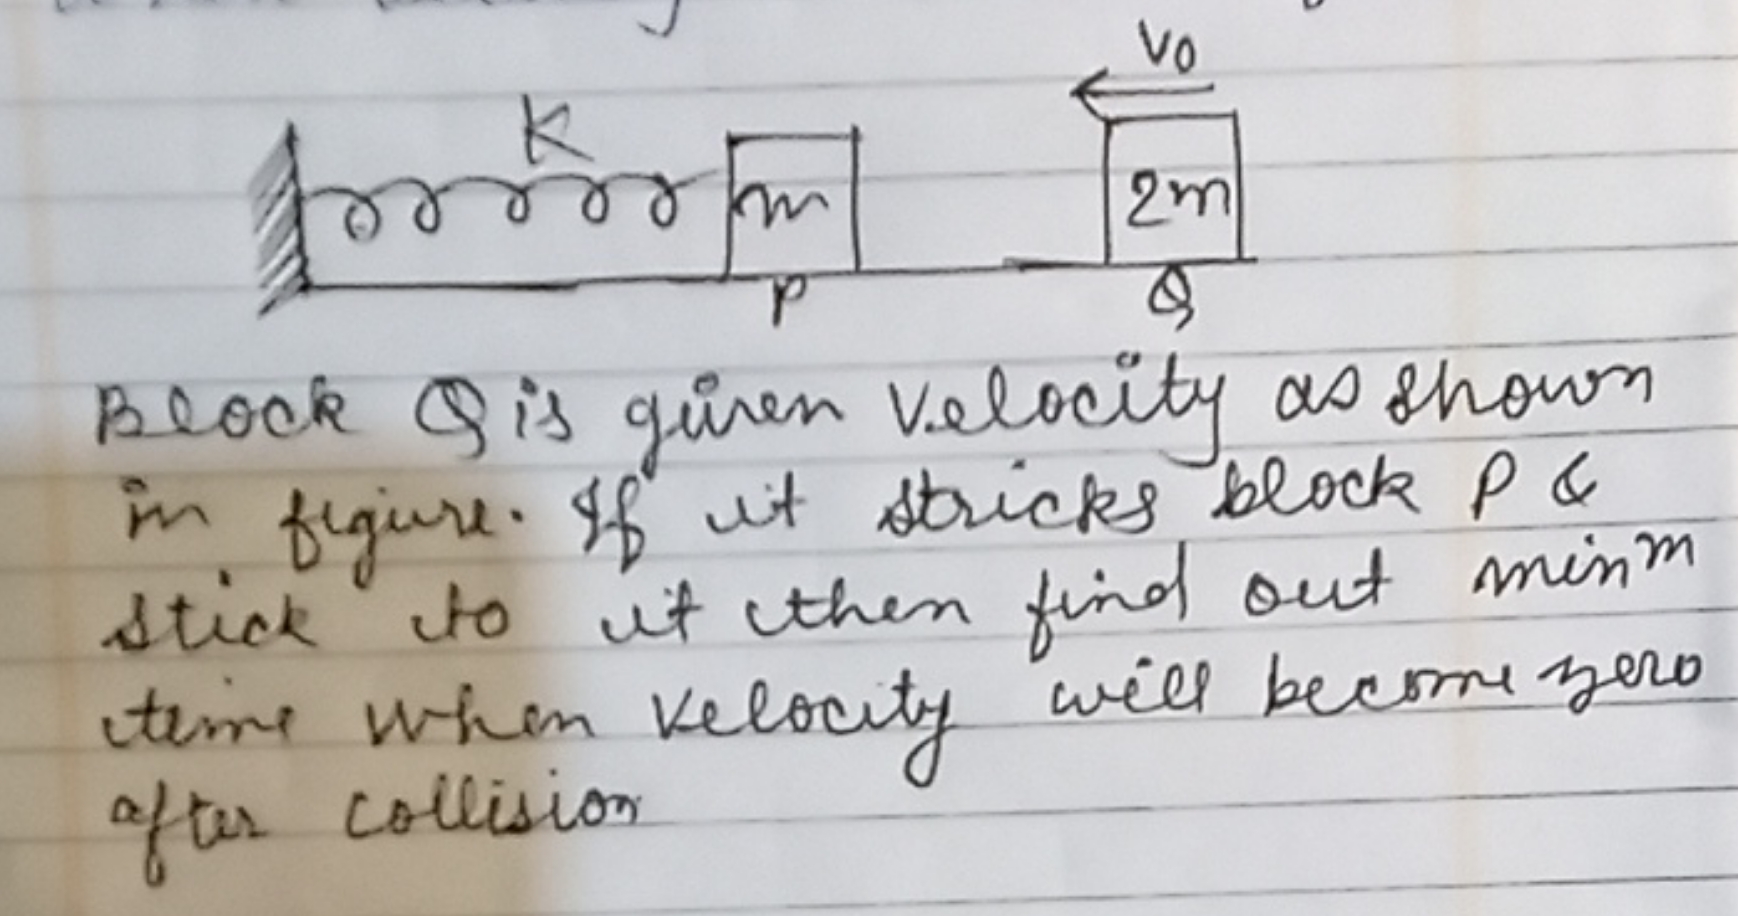 Beock Q is given velocity as shown in figure. If it stricks block P \&